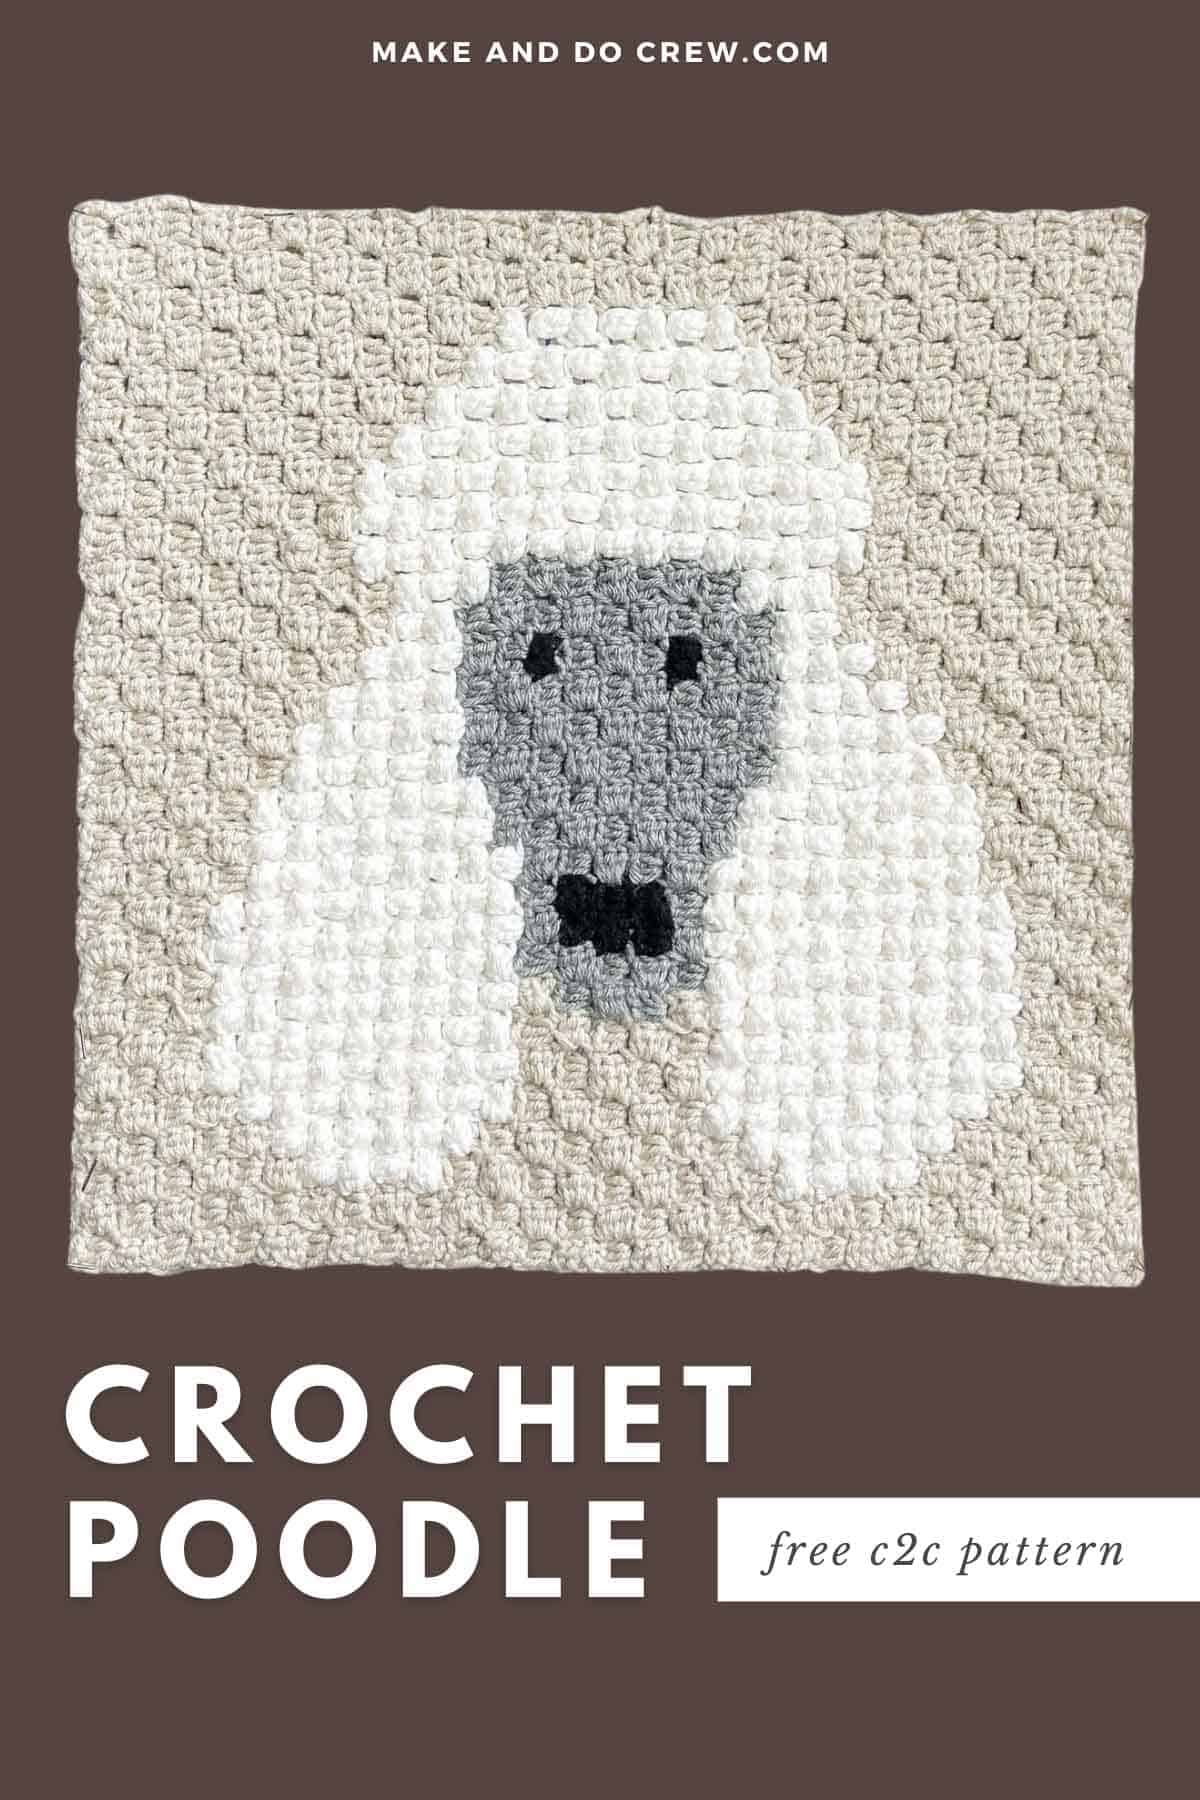 This image shows a free crochet pattern for a corner to corner crochet blanket square featuring a white and gray Poodle dog face on a brown background.